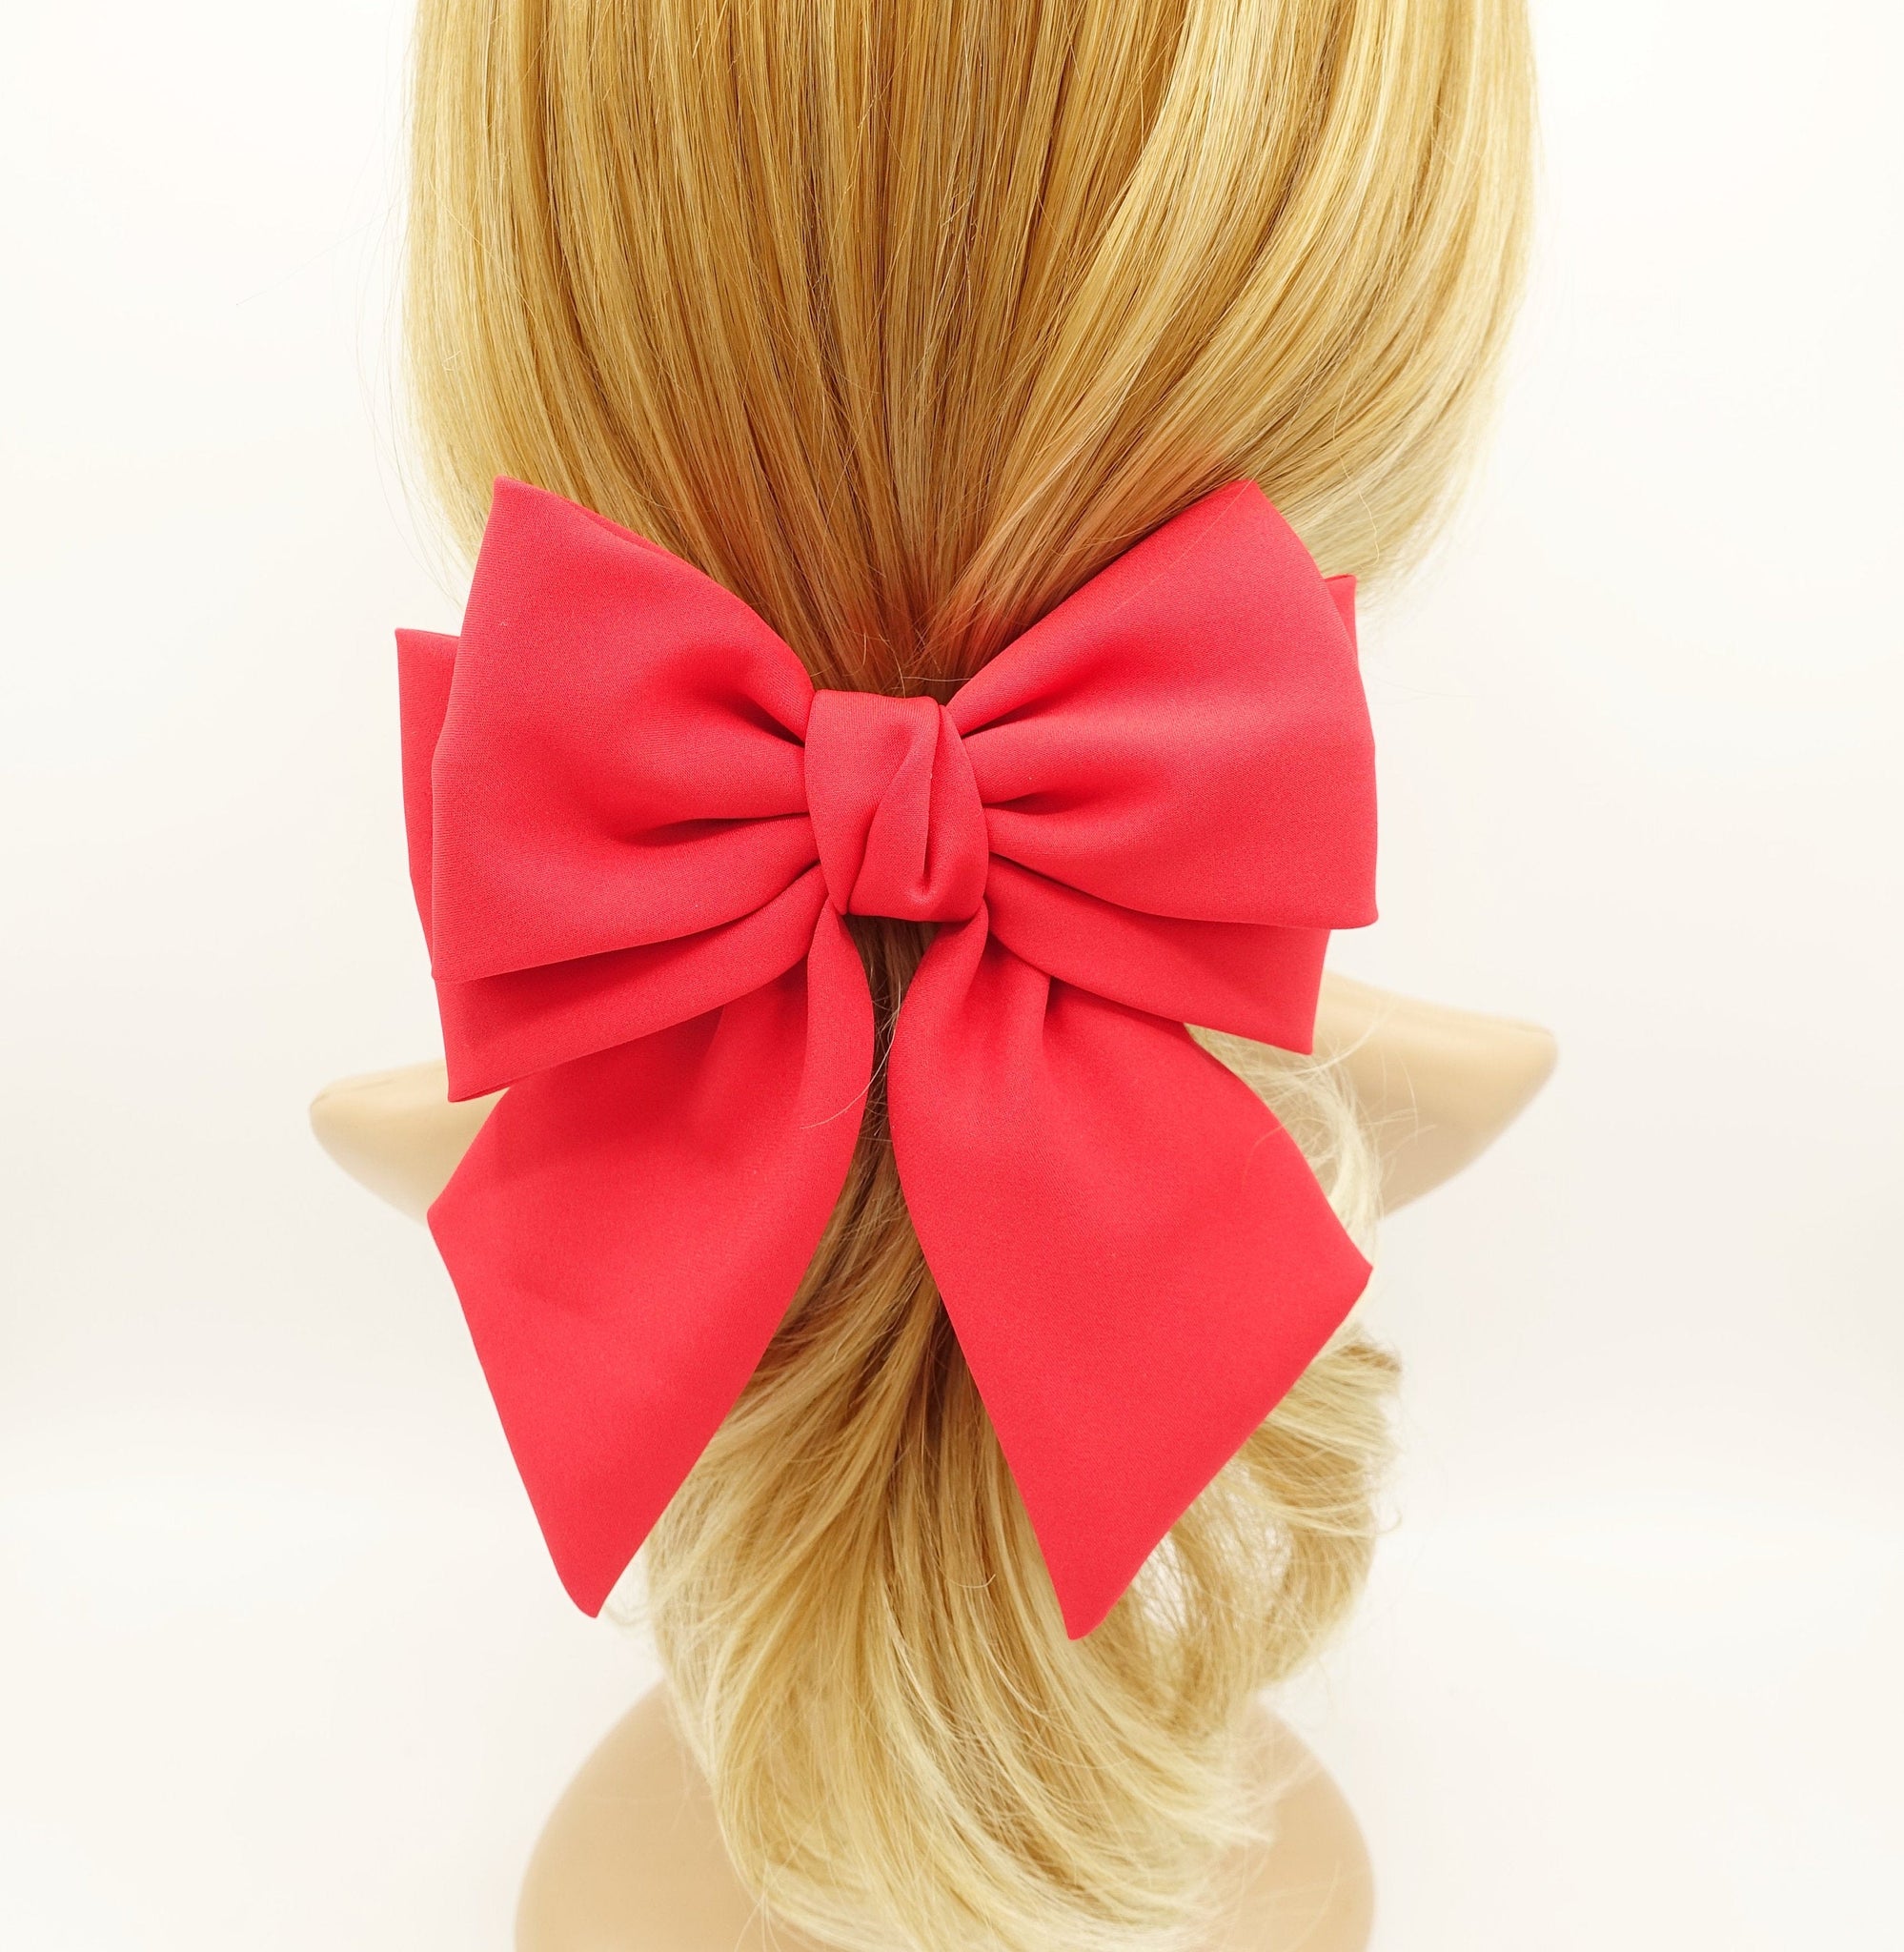 veryshine.com Barrette (Bow) Red thick double layered tail hair bow chiffon hair barrette for women